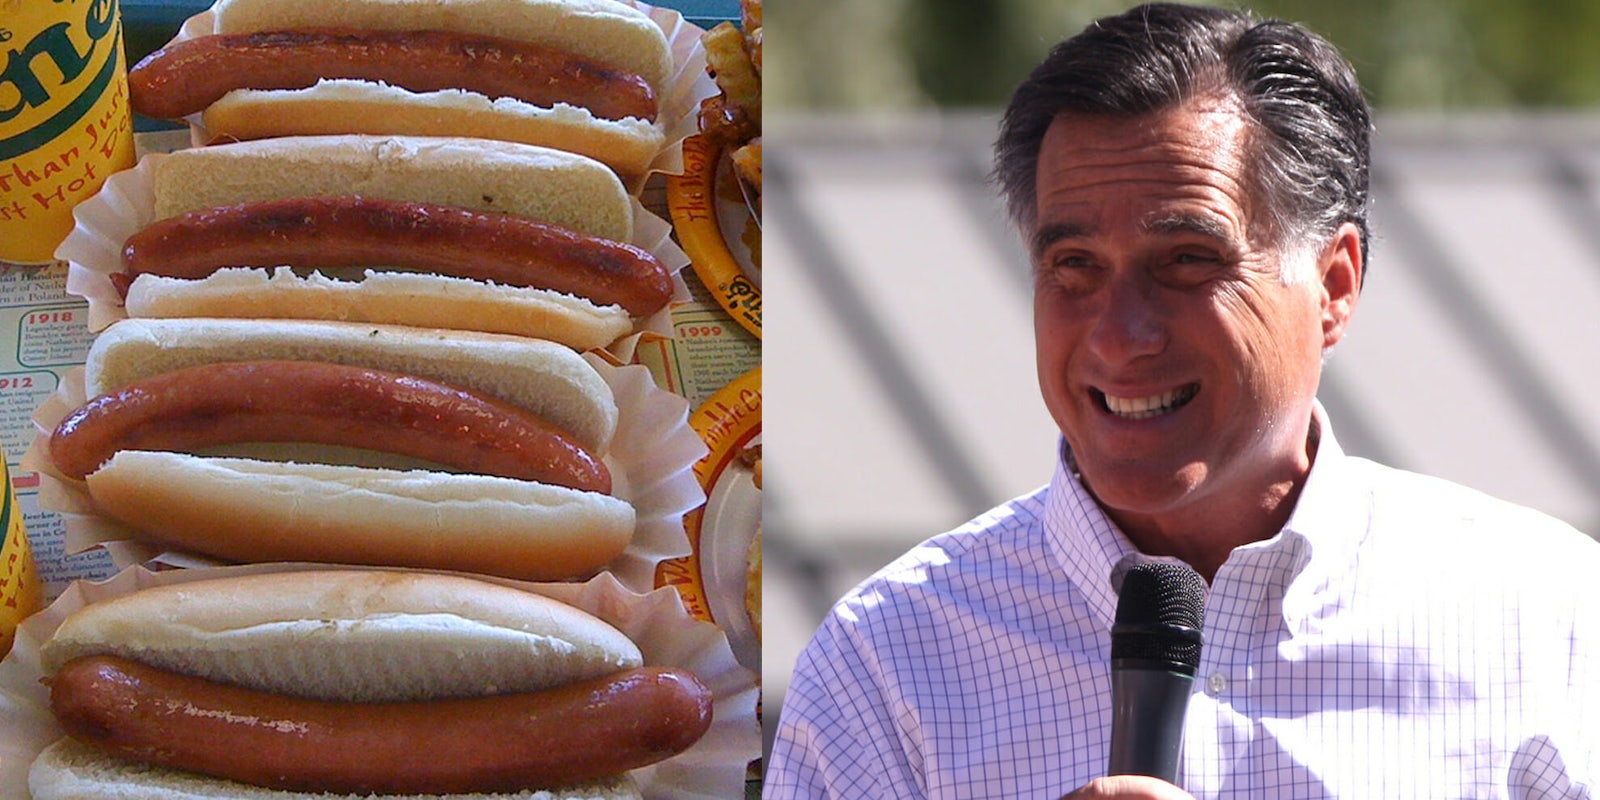 Mitt Romney said his favorite meat are hot dogs.